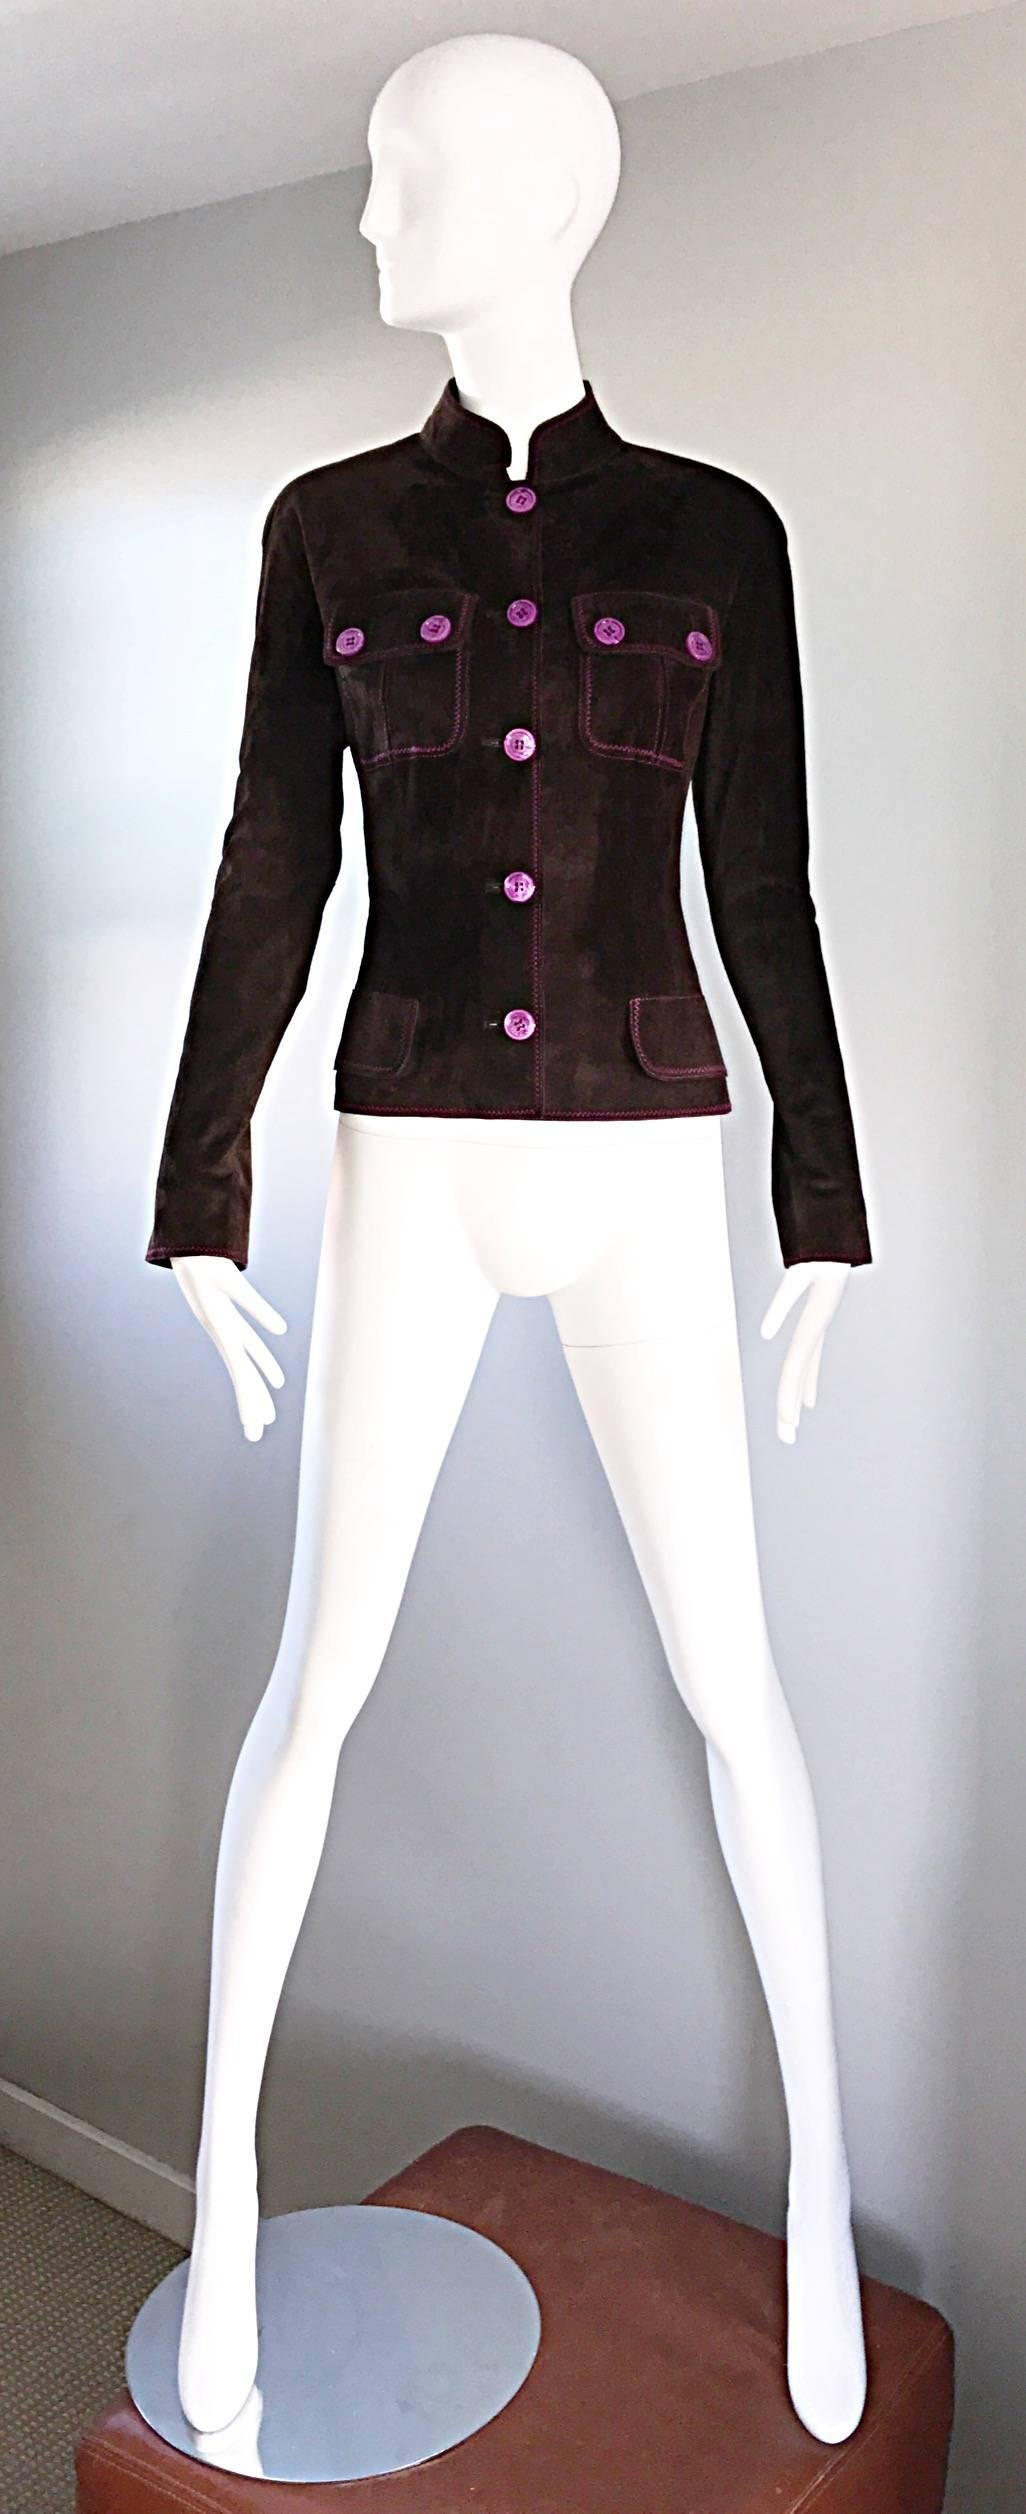 Chic vintage 90s EMANUEL UNGARO cattle skin leather suede Moto jacket! Rich chocolate brown color, with purple / fuchsia pink buttons and stitching details. Slim tailored and fits like a dream! Four pockets on the front. Buttons up the front.